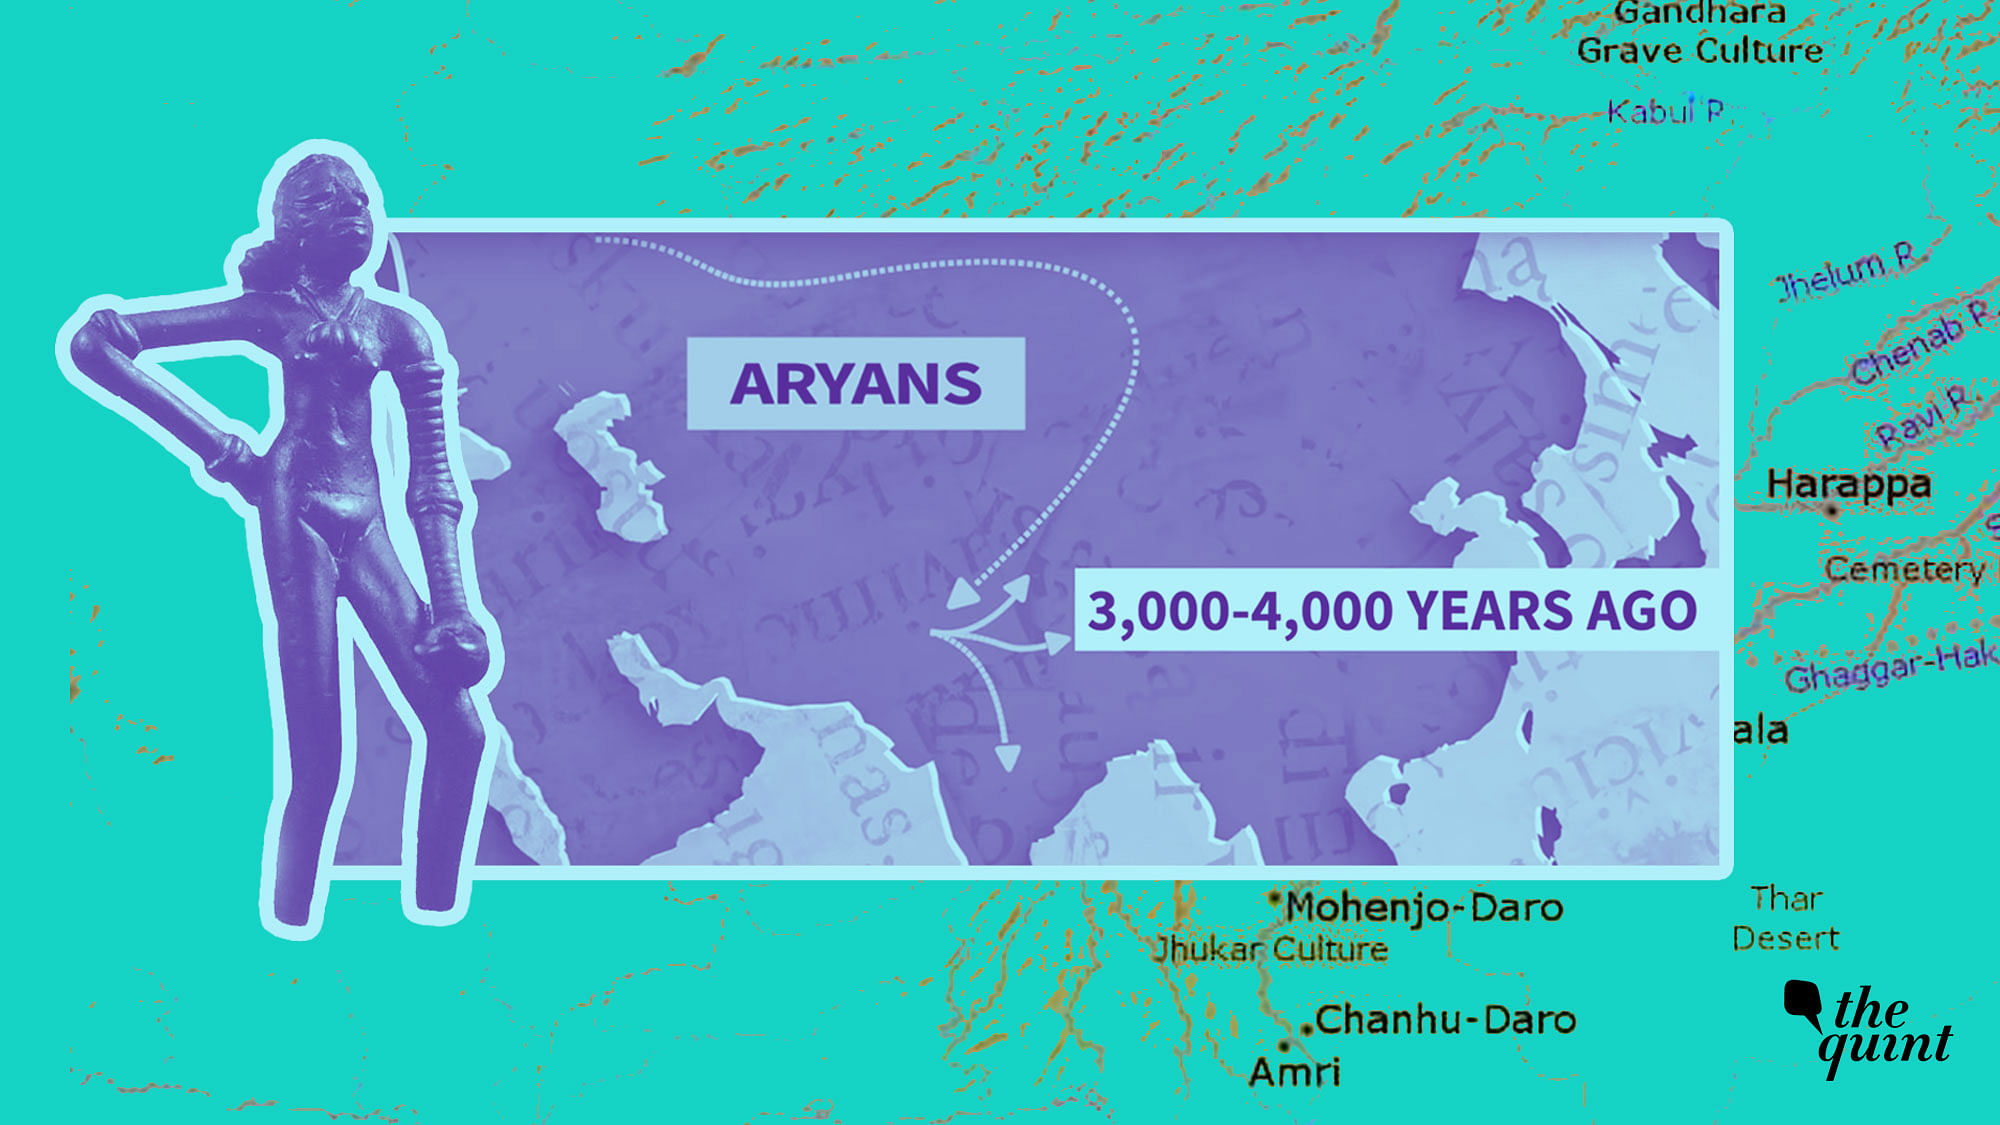 Genetics  has proven that the Aryans did indeed migrate to India and that the &nbsp; Harappan civilisation was pre-Aryan.